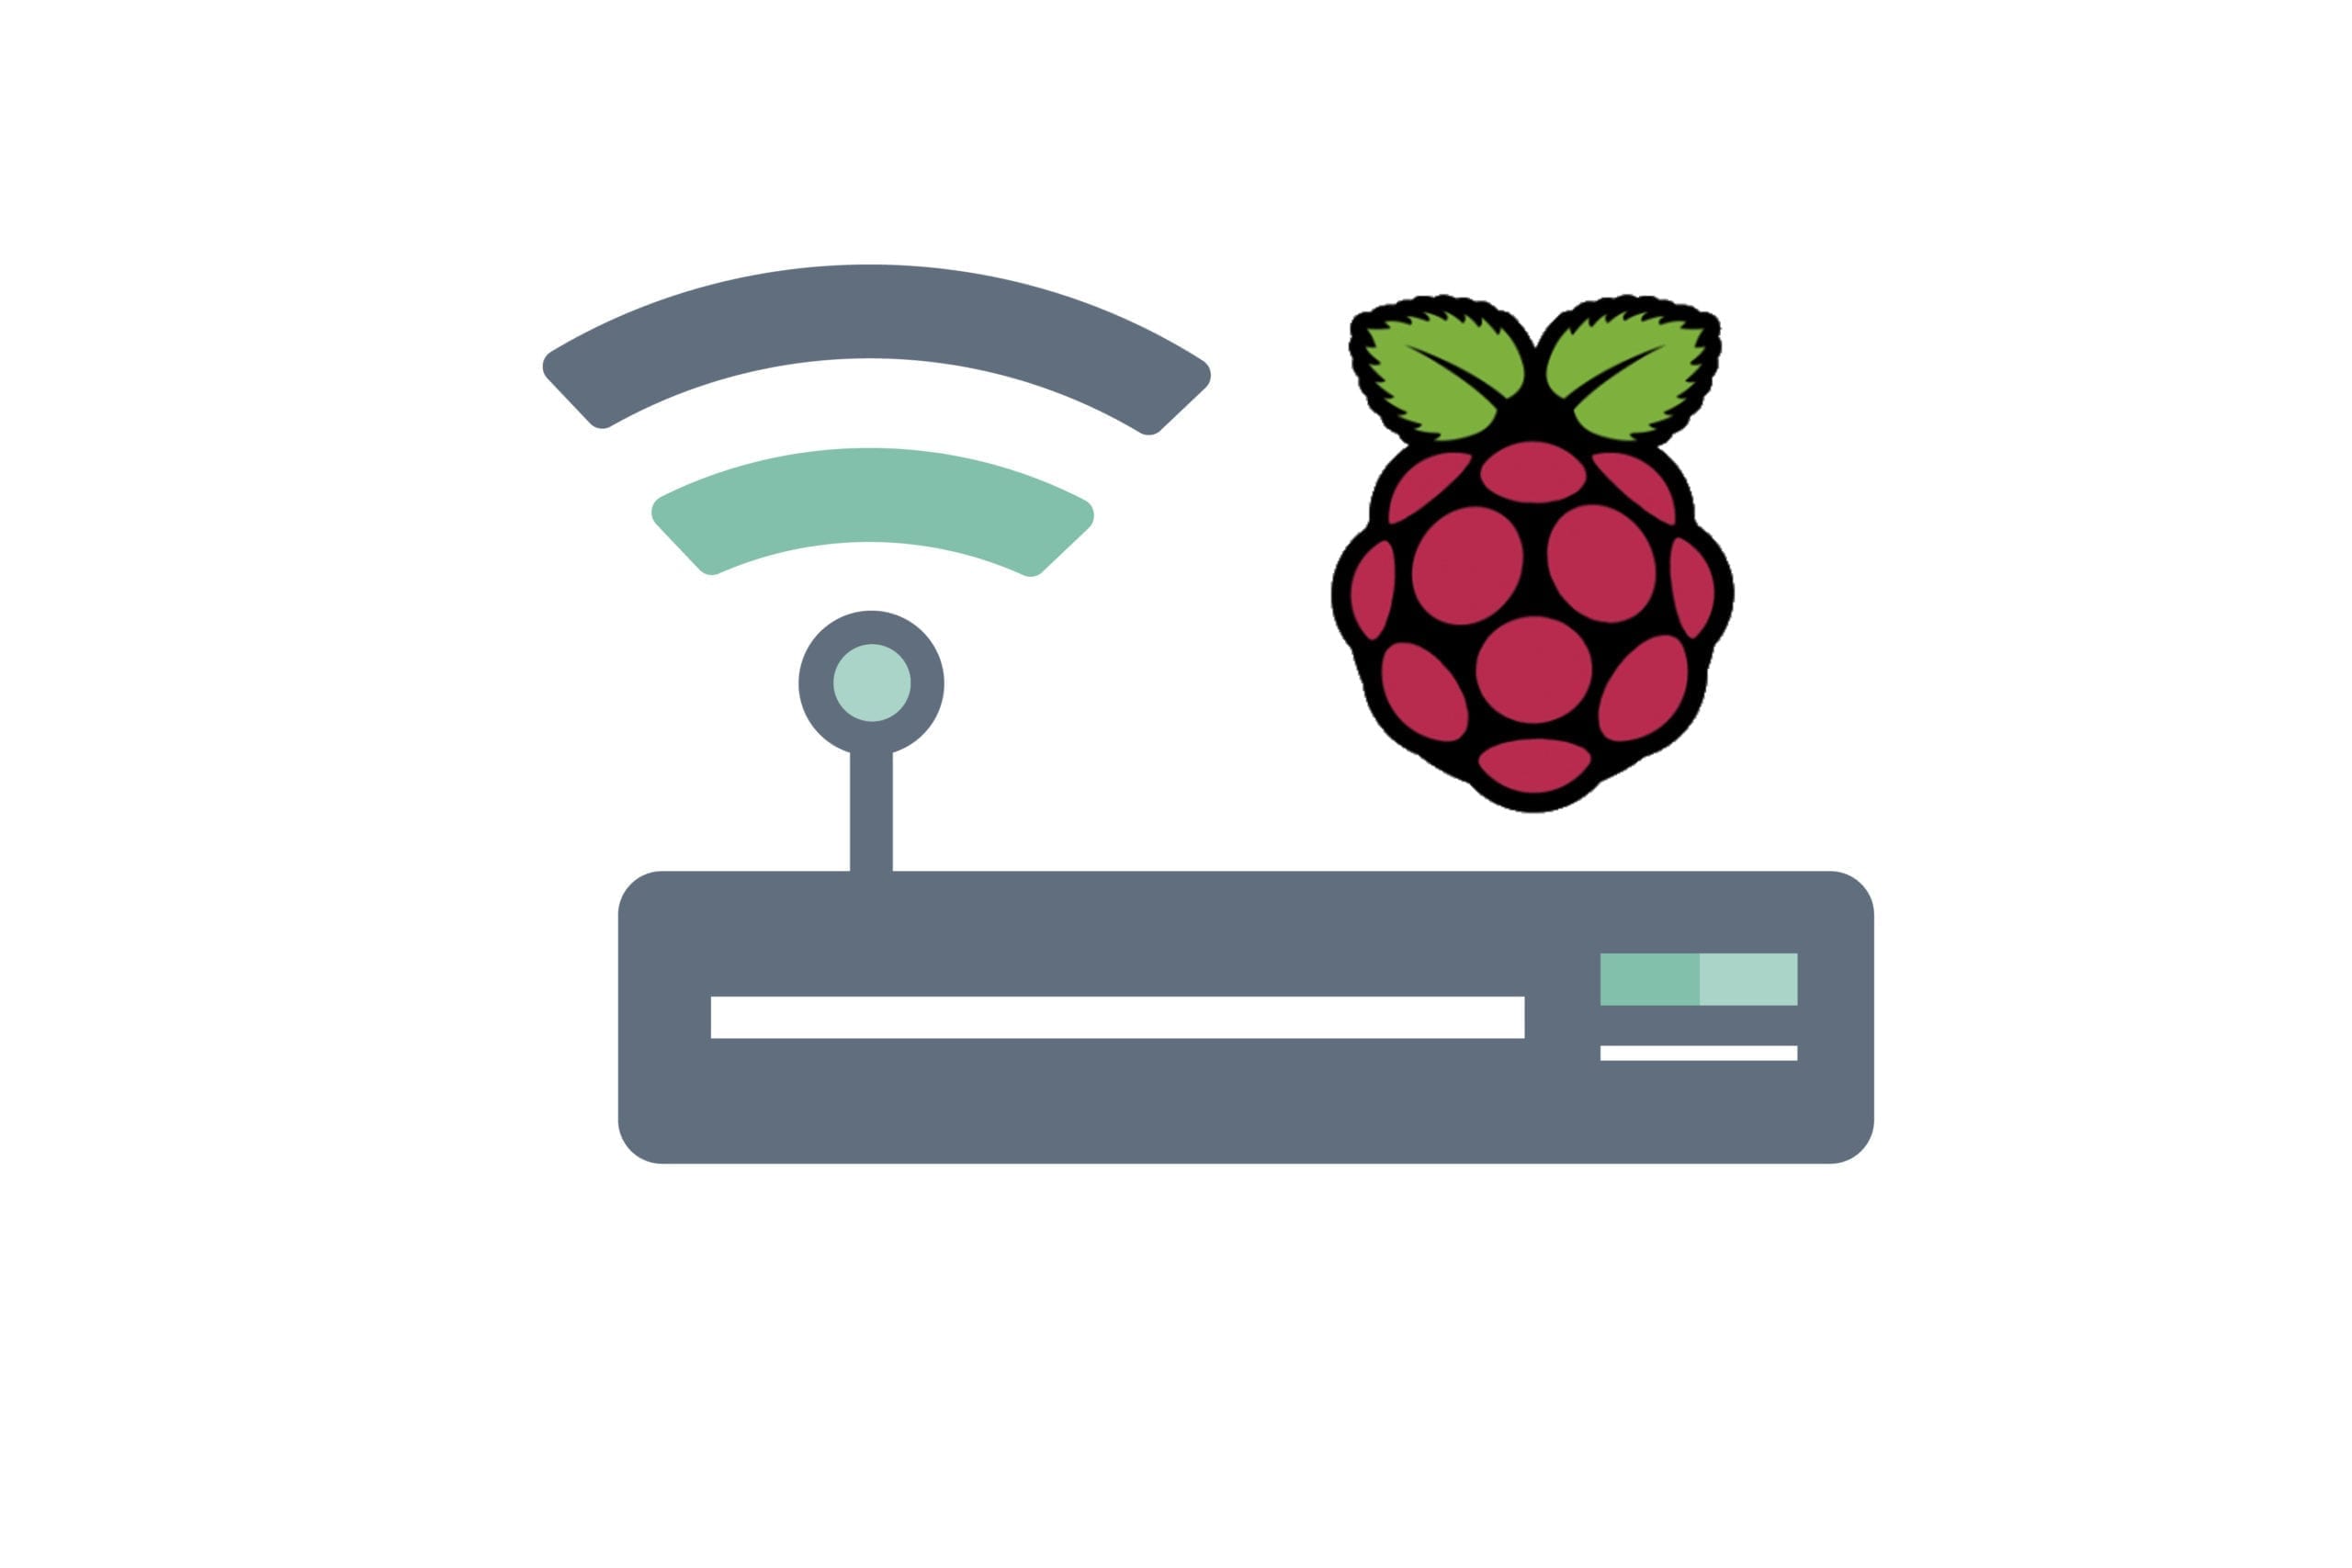 Access Point WiFi with Raspberry Pi, extend your wired network